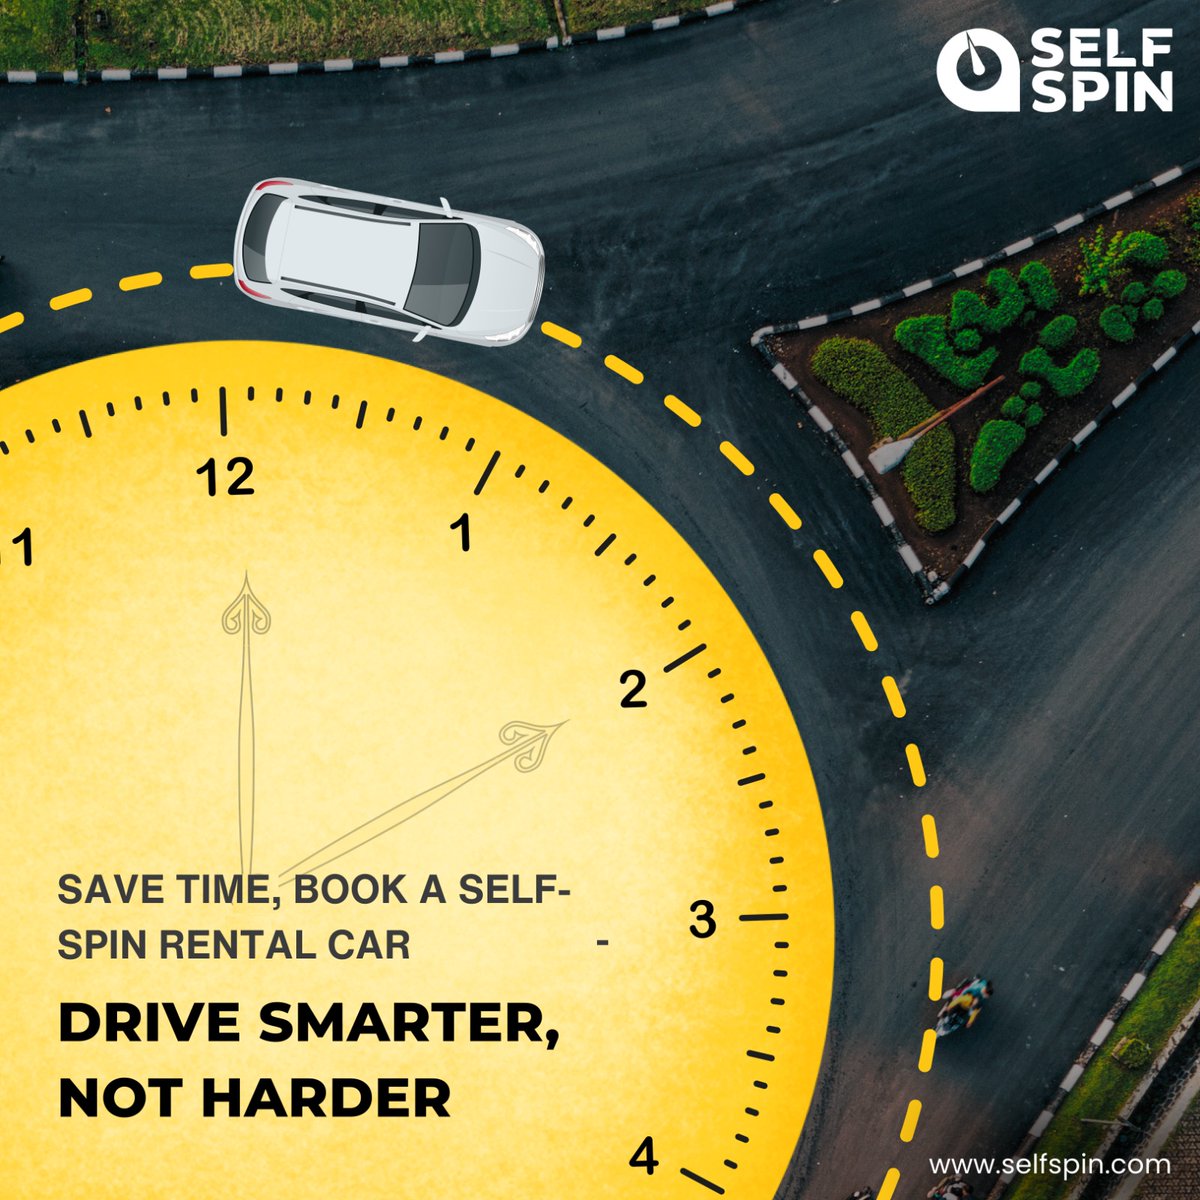 ⏳ With SelfSpin, embrace efficient time management while exploring! Let us help you make every second count. 🚗💨 

#SelfDrive #SelfSpin #CarRental #Pune #Bengaluru #Goa #RentalServices #BikeRental #SelfDriveRental #AnytimeAnywhere #RoadTrips #TimeManagement